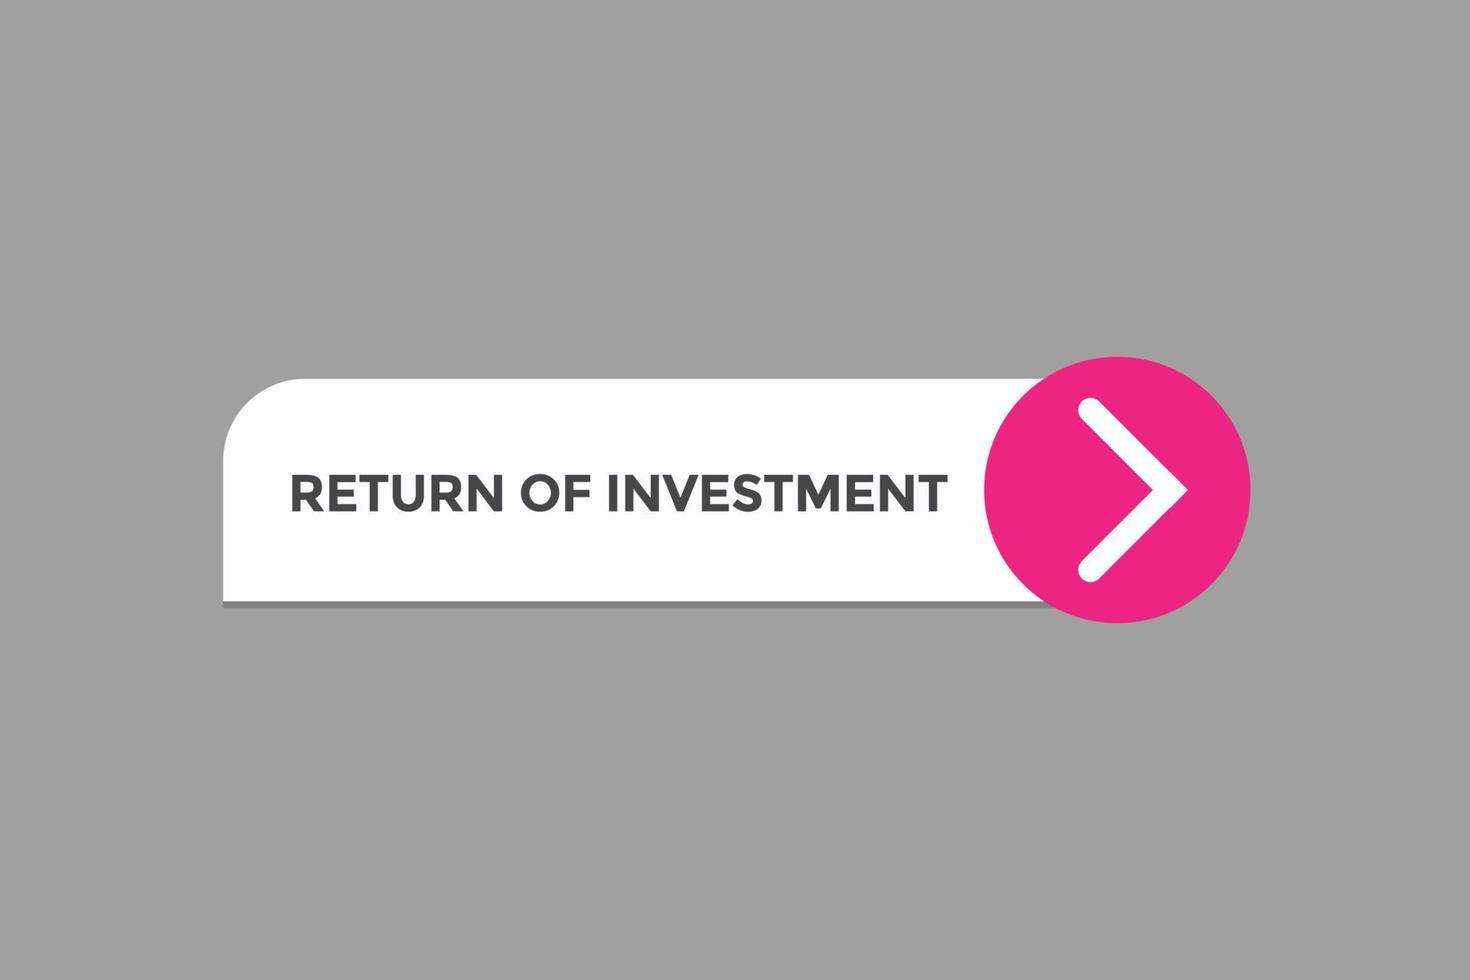 return of investment button vectors.sign label speech bubble return of investment vector